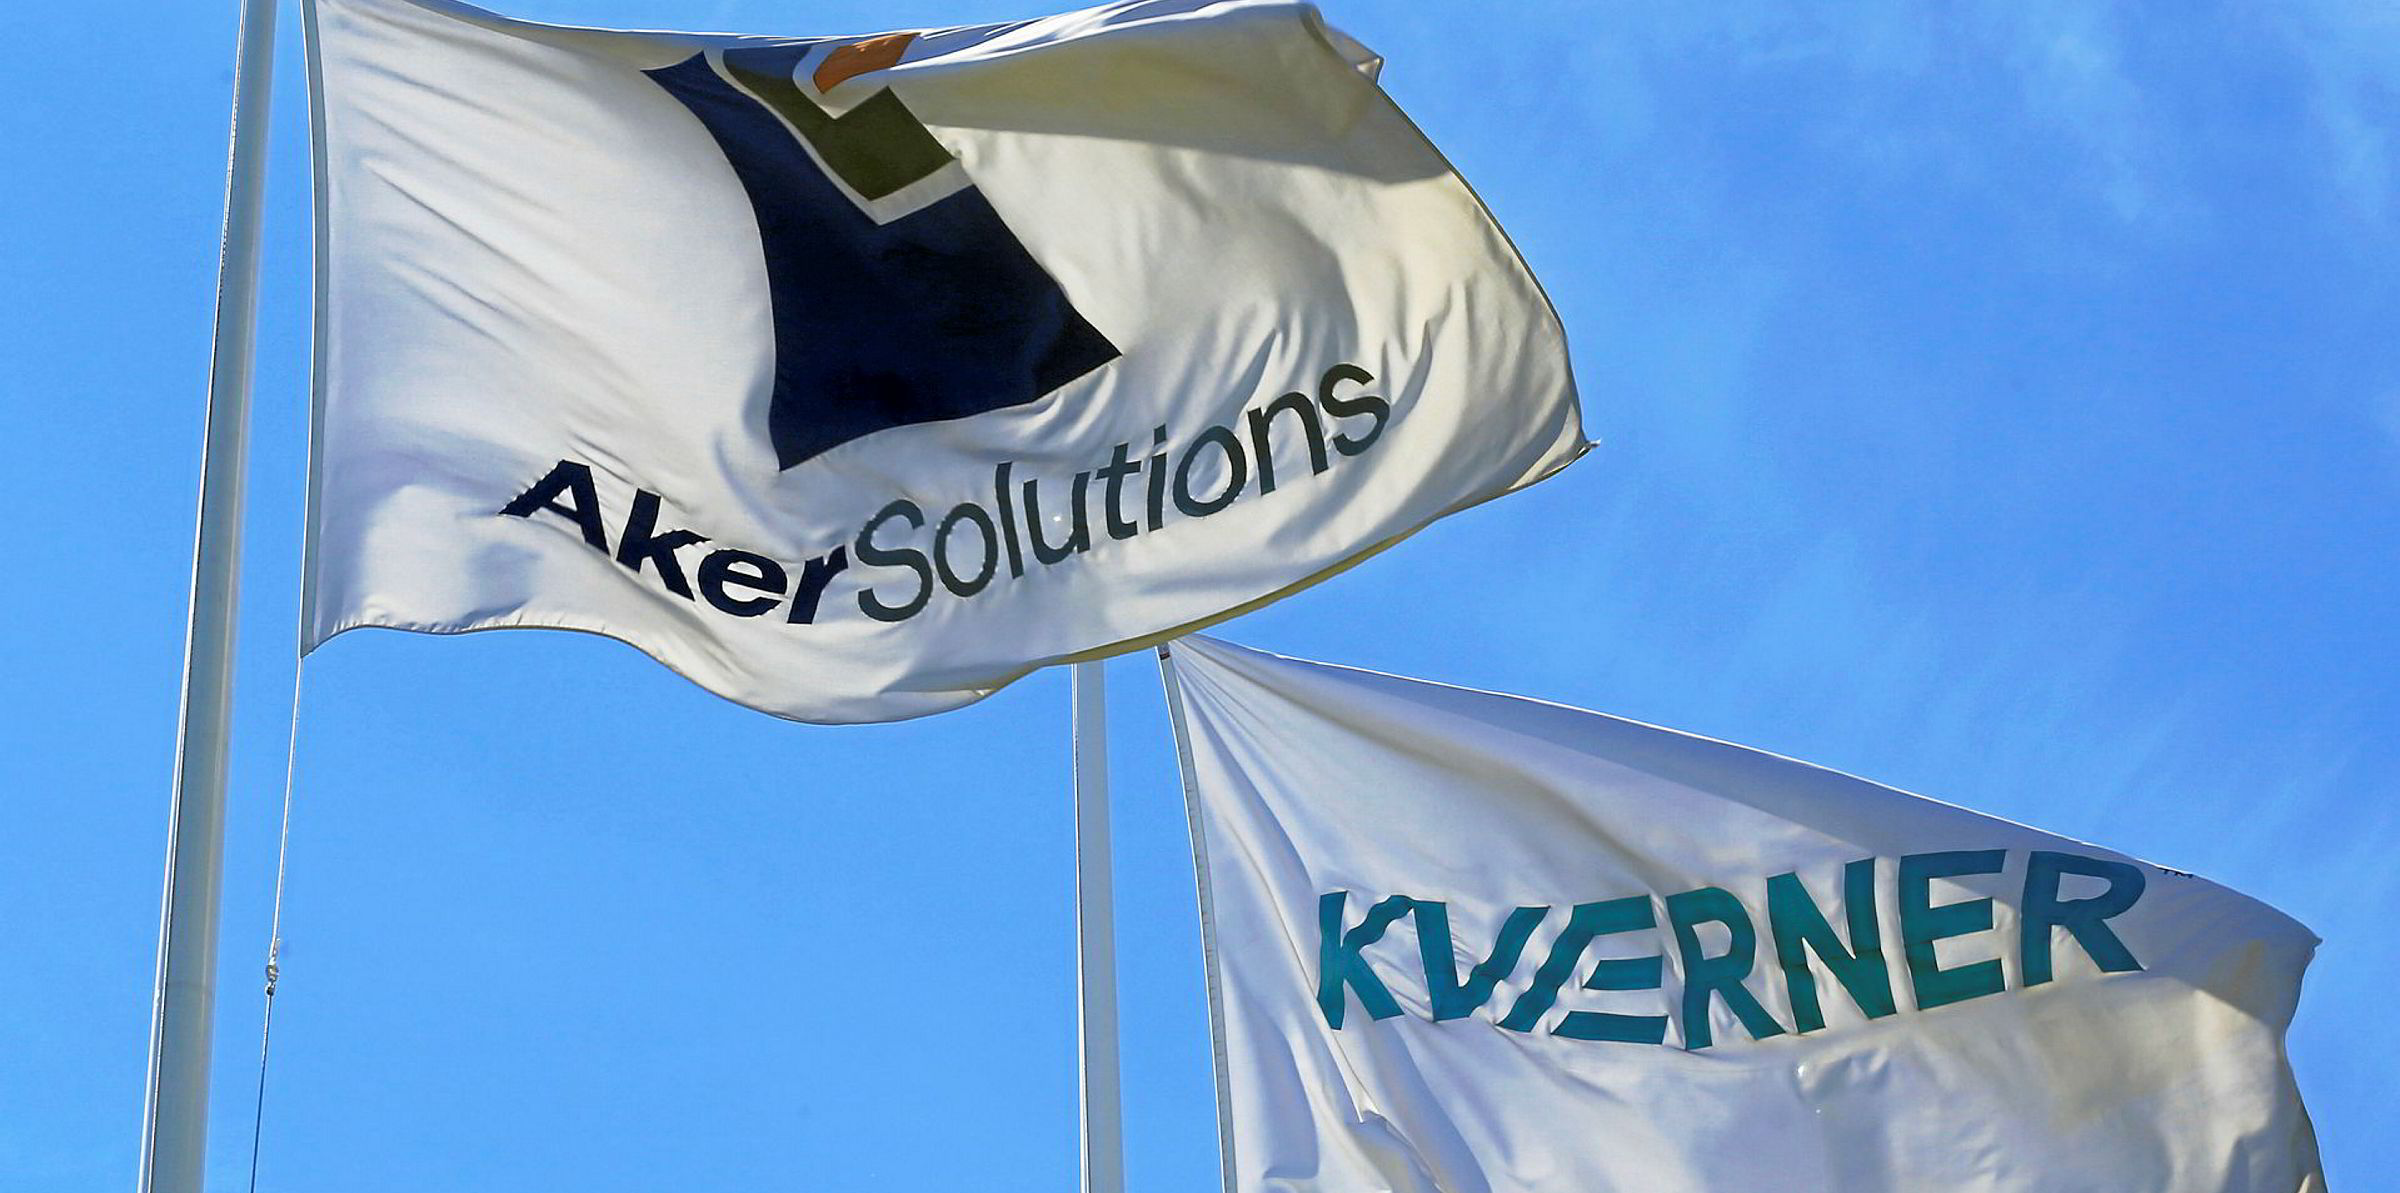 Aker Solutions to spin-off amid Kvaerner merger | Recharge